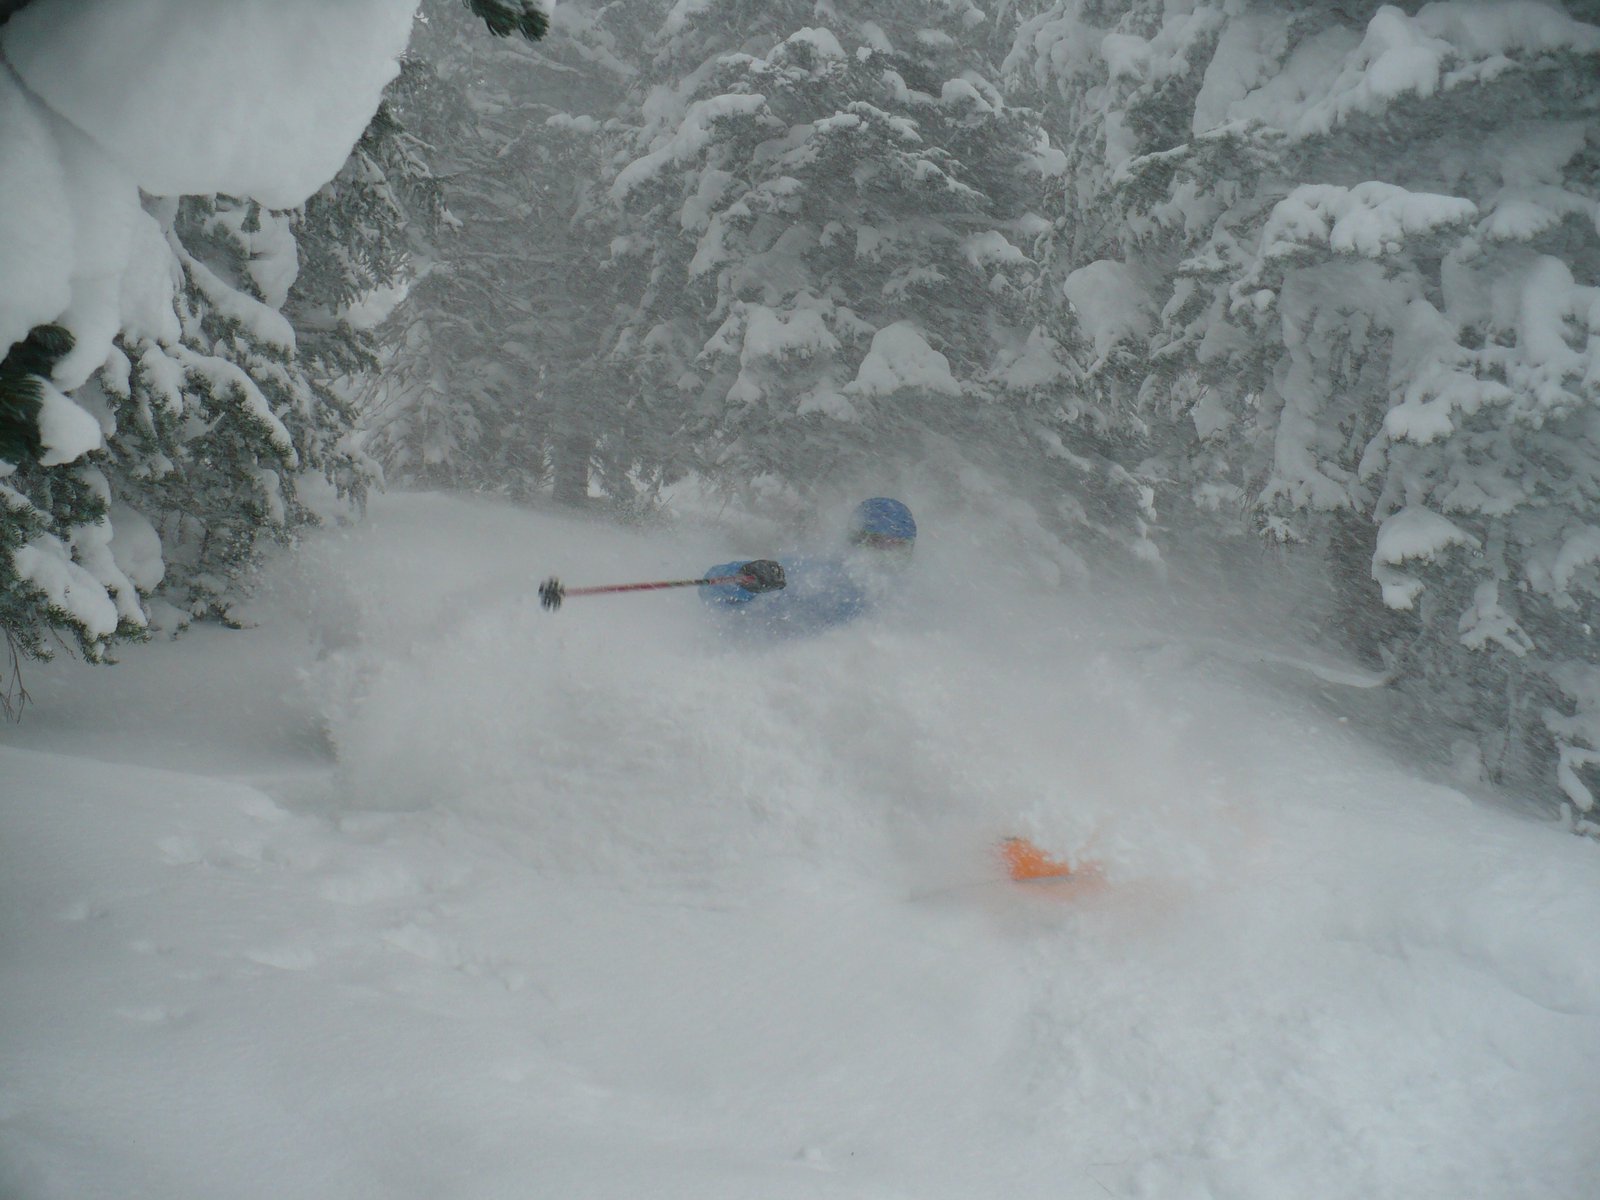 Blower at Alta